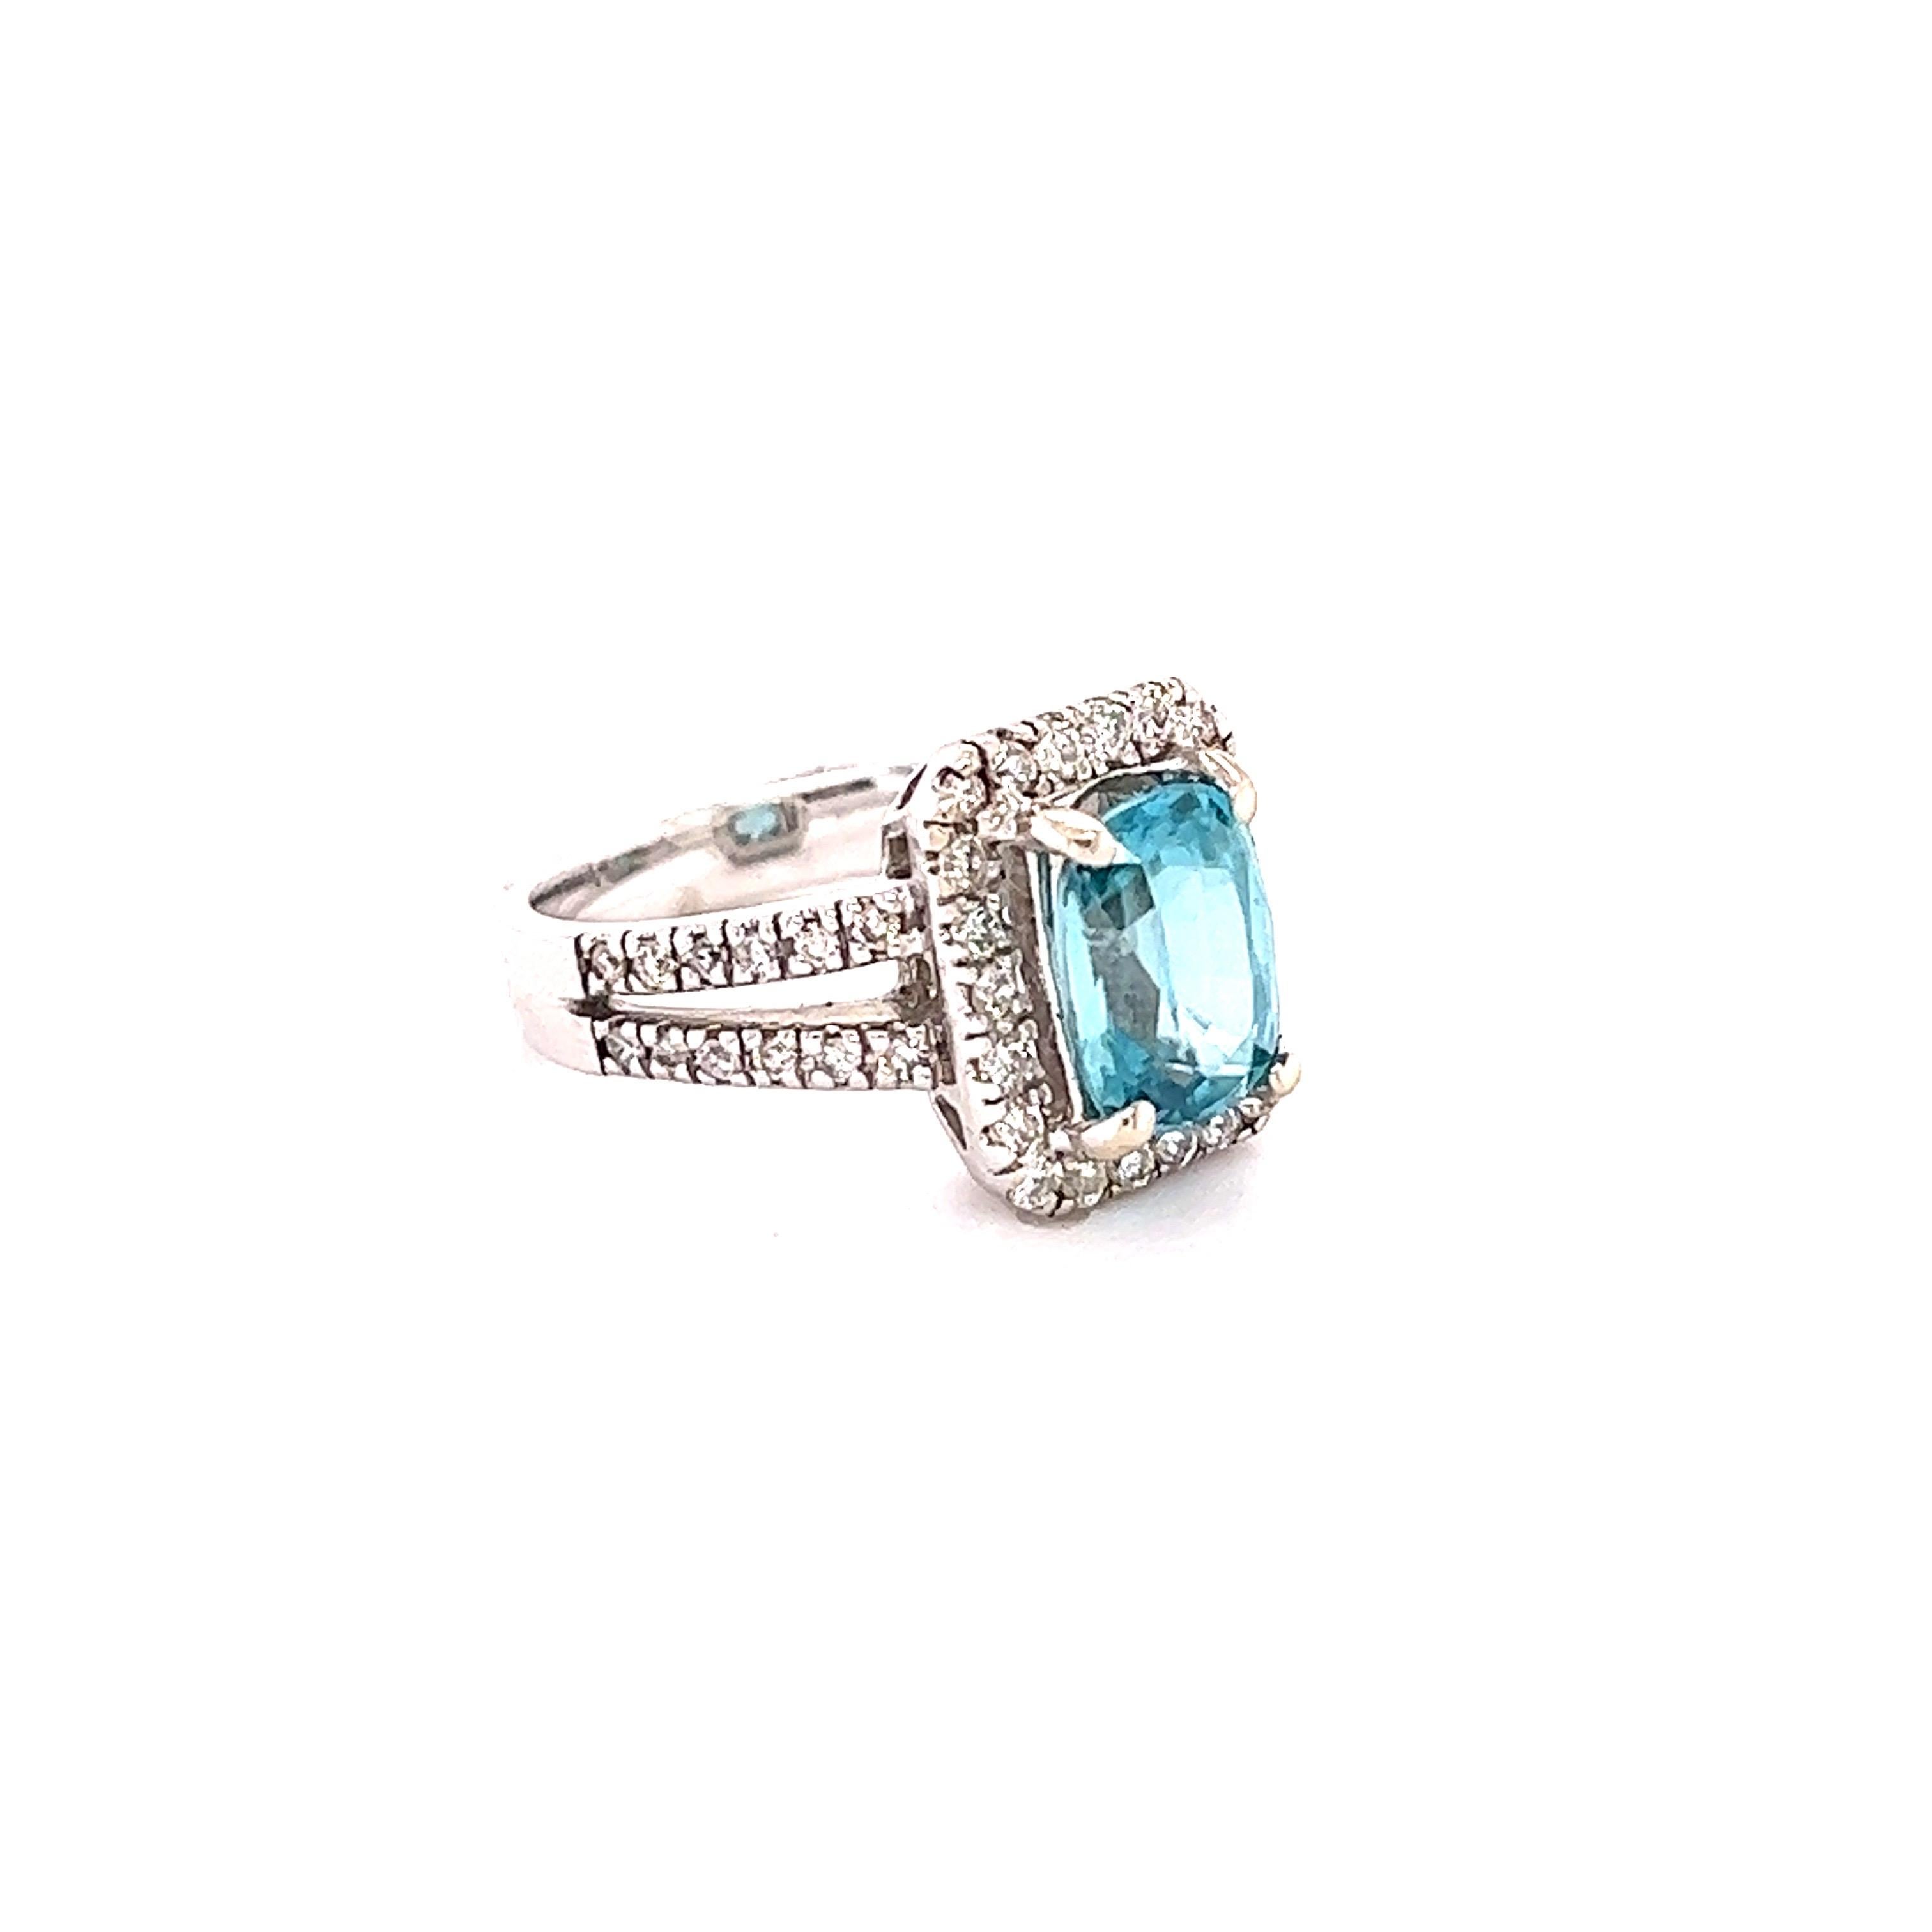 Blue Zircon is a natural stone mined mainly in Sri Lanka, Myanmar, and Australia.  
This ring has a Oval Cushion Cut Blue Zircon that weighs 3.21 carats and is surrounded by 46 Round Cut Diamonds that weigh 0.60 Carats. The total carat weight of the